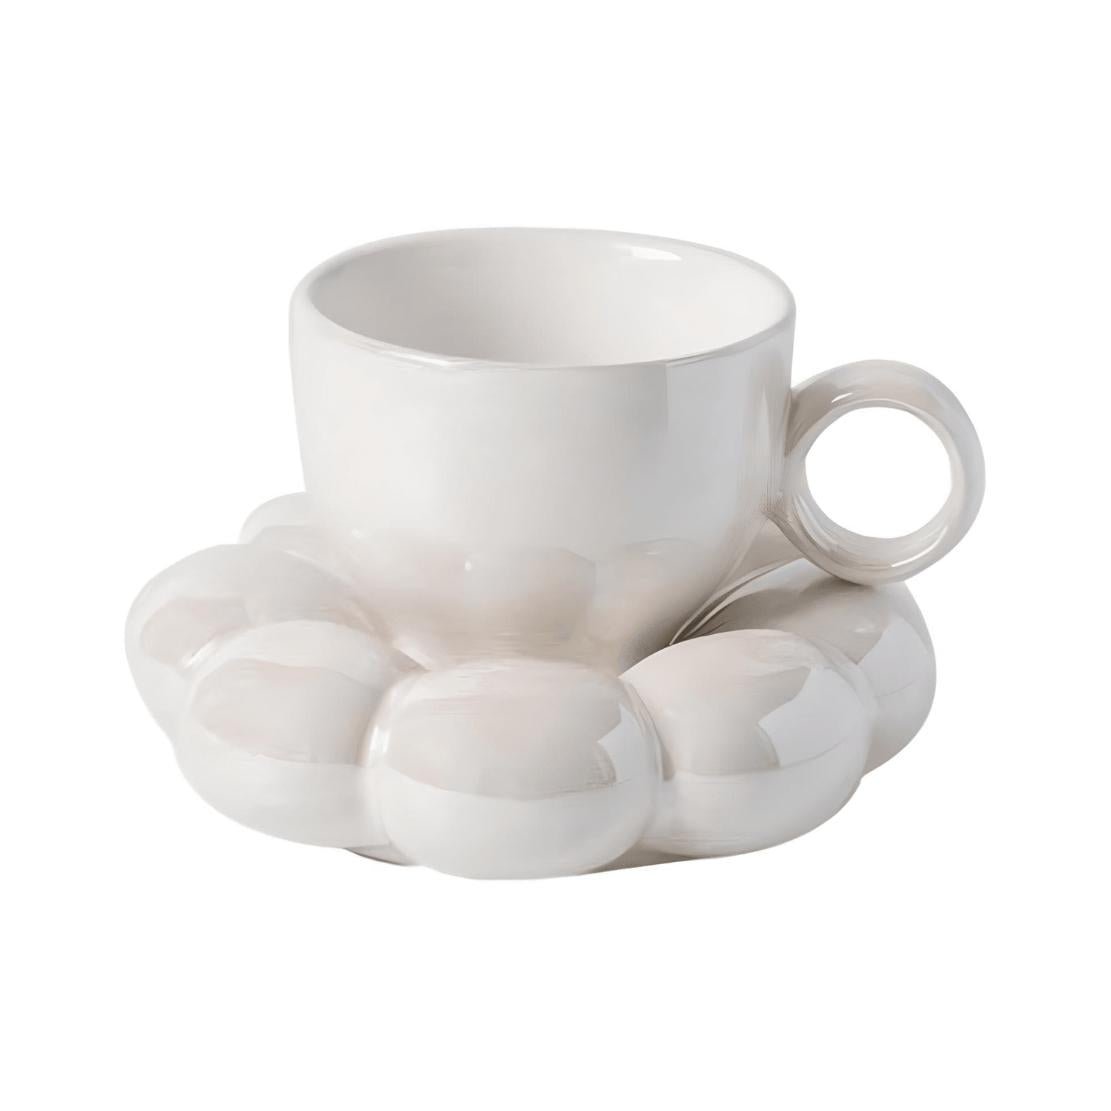 White tea cup with flower saucer